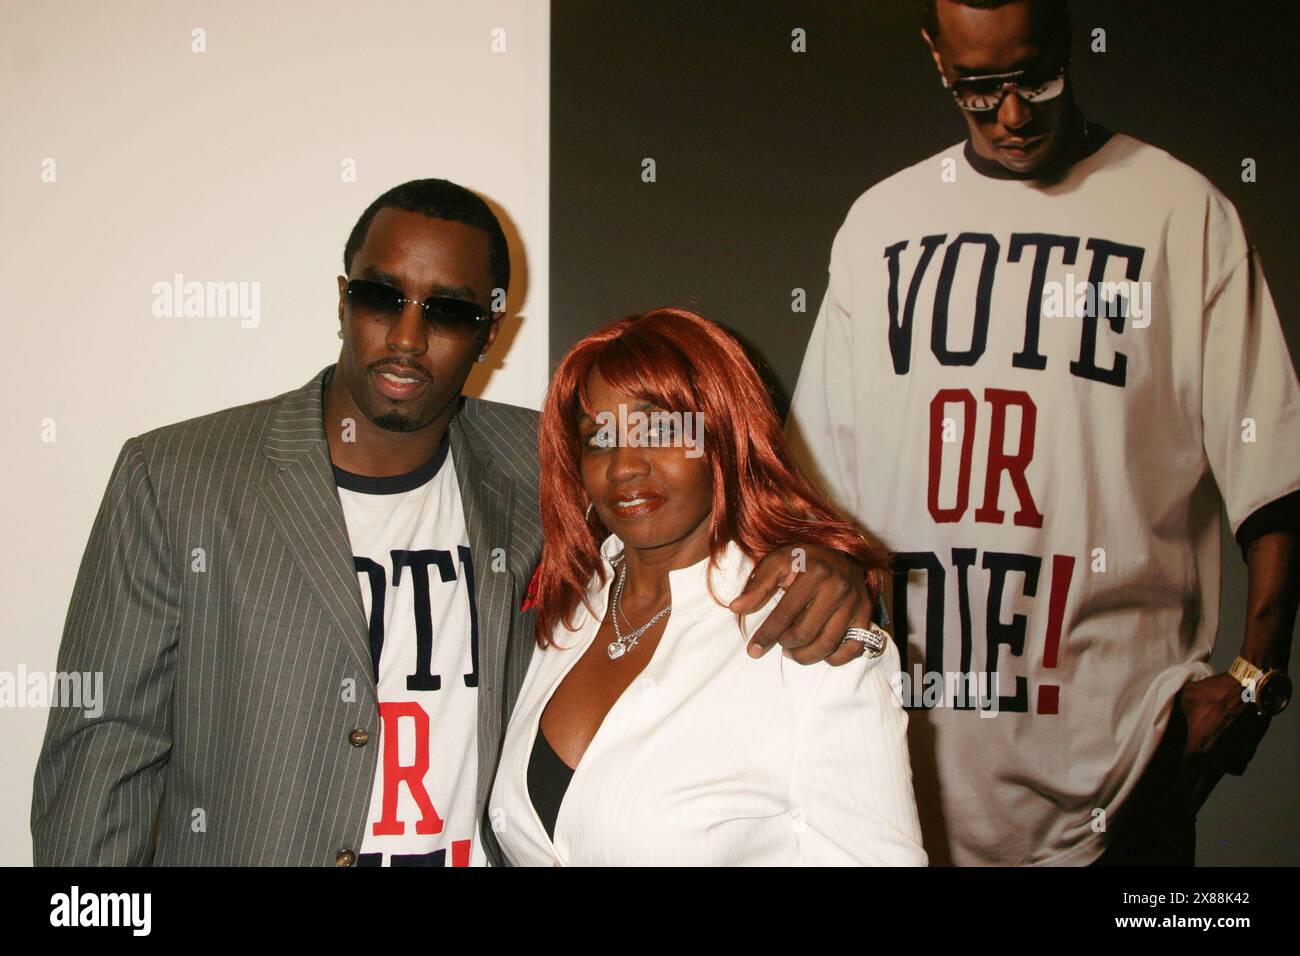 Sean 'P. Diddy' Combs and Janice Combs attend P. Diddy's Citizen Change Political Art Exhibit Campaign at Tony Shafrazi Gallery in New York City on September 29, 2004.  Photo Credit: Henry McGee/MediaPunch Stock Photo